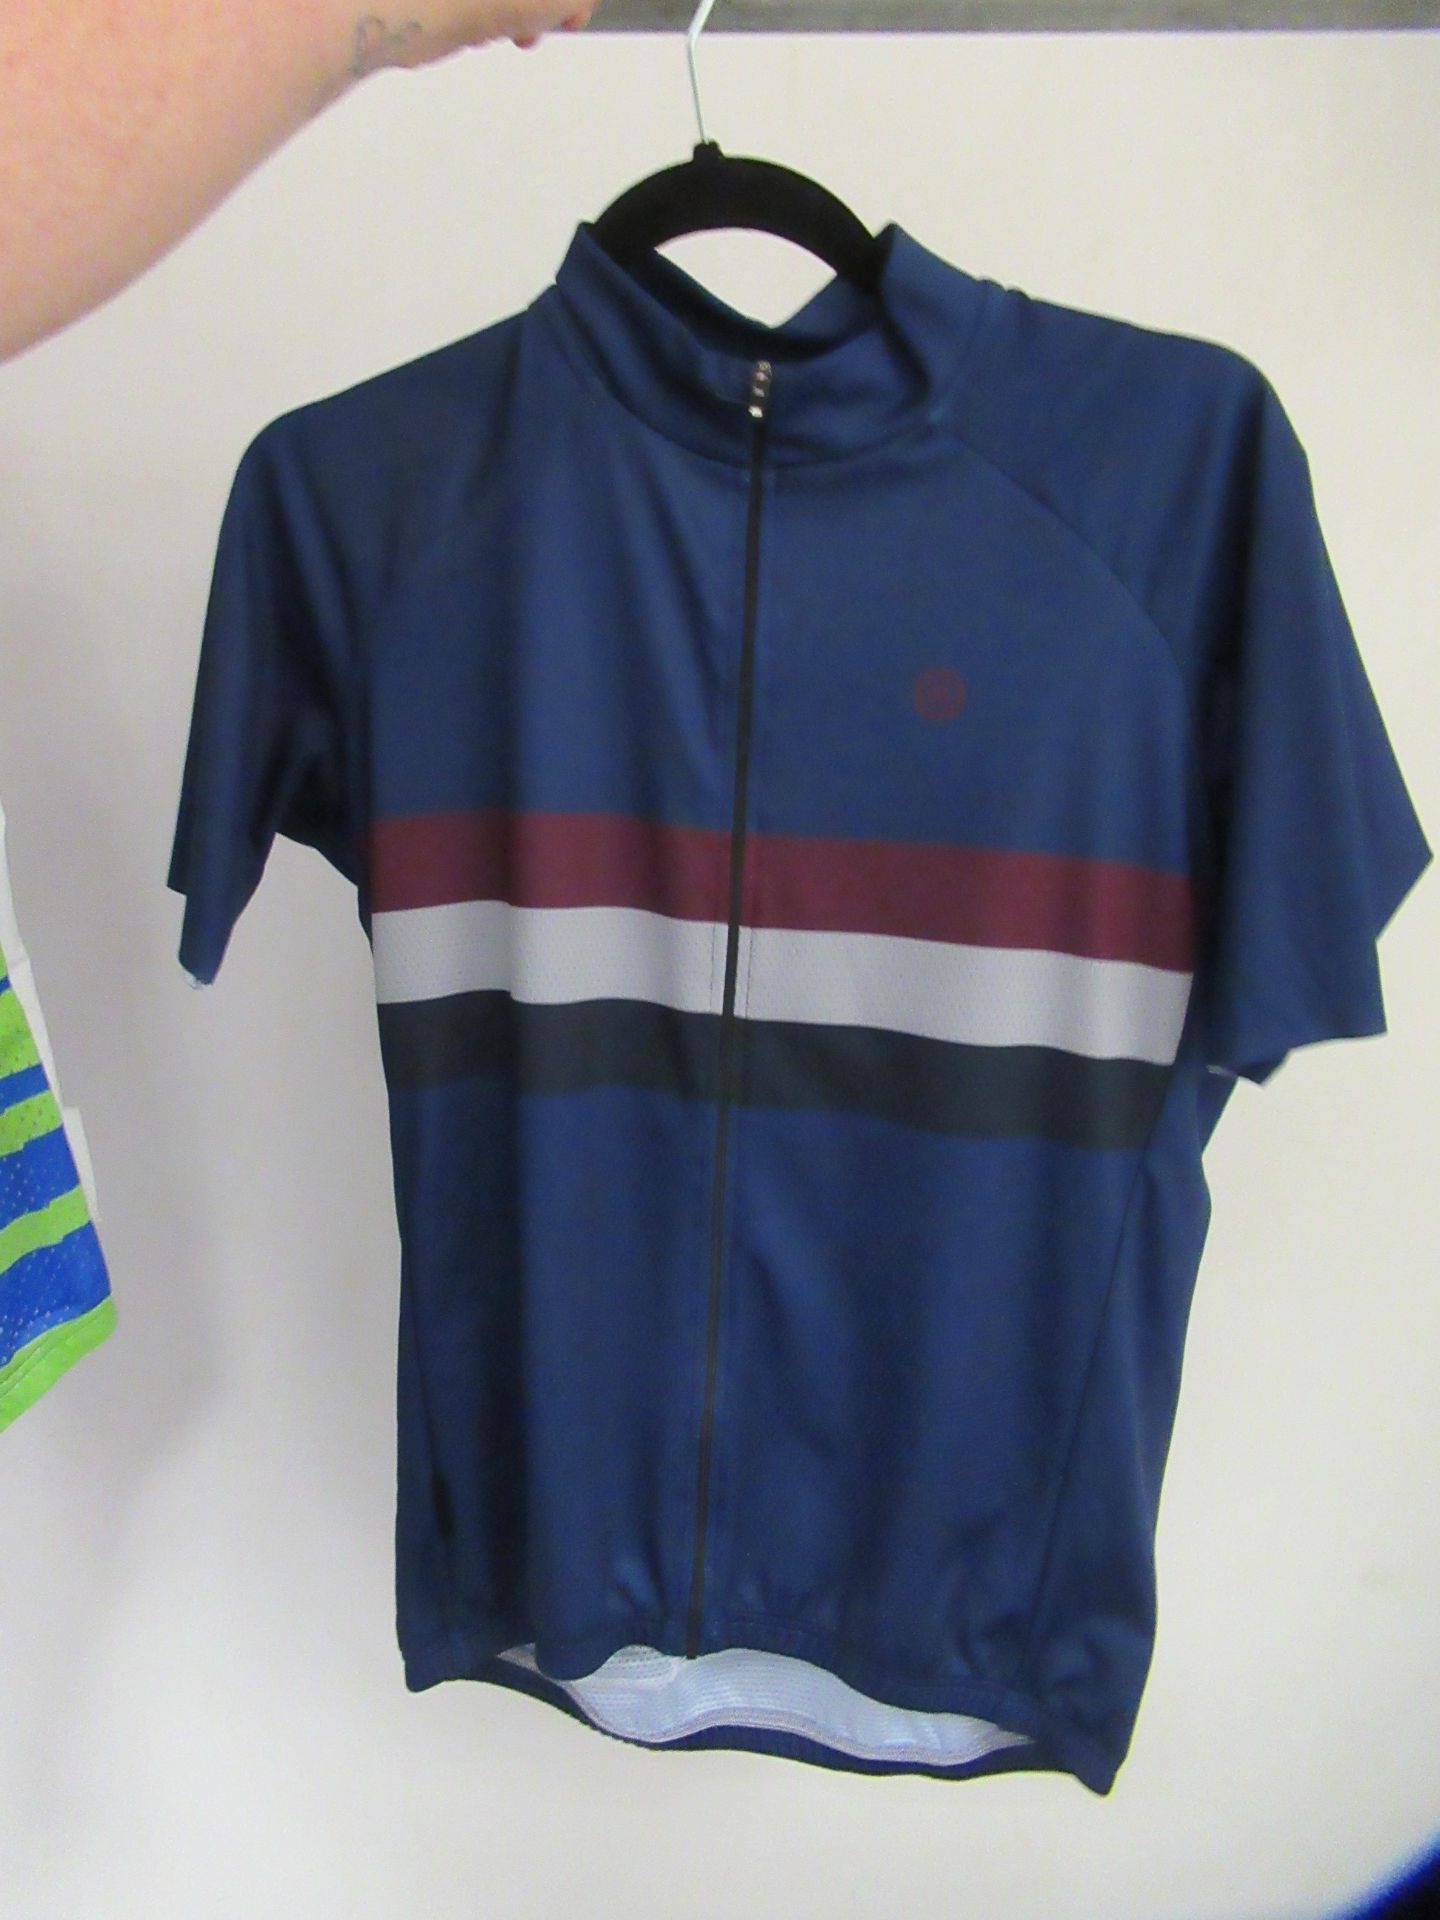 XL Male Cycling Clothes - Image 5 of 5